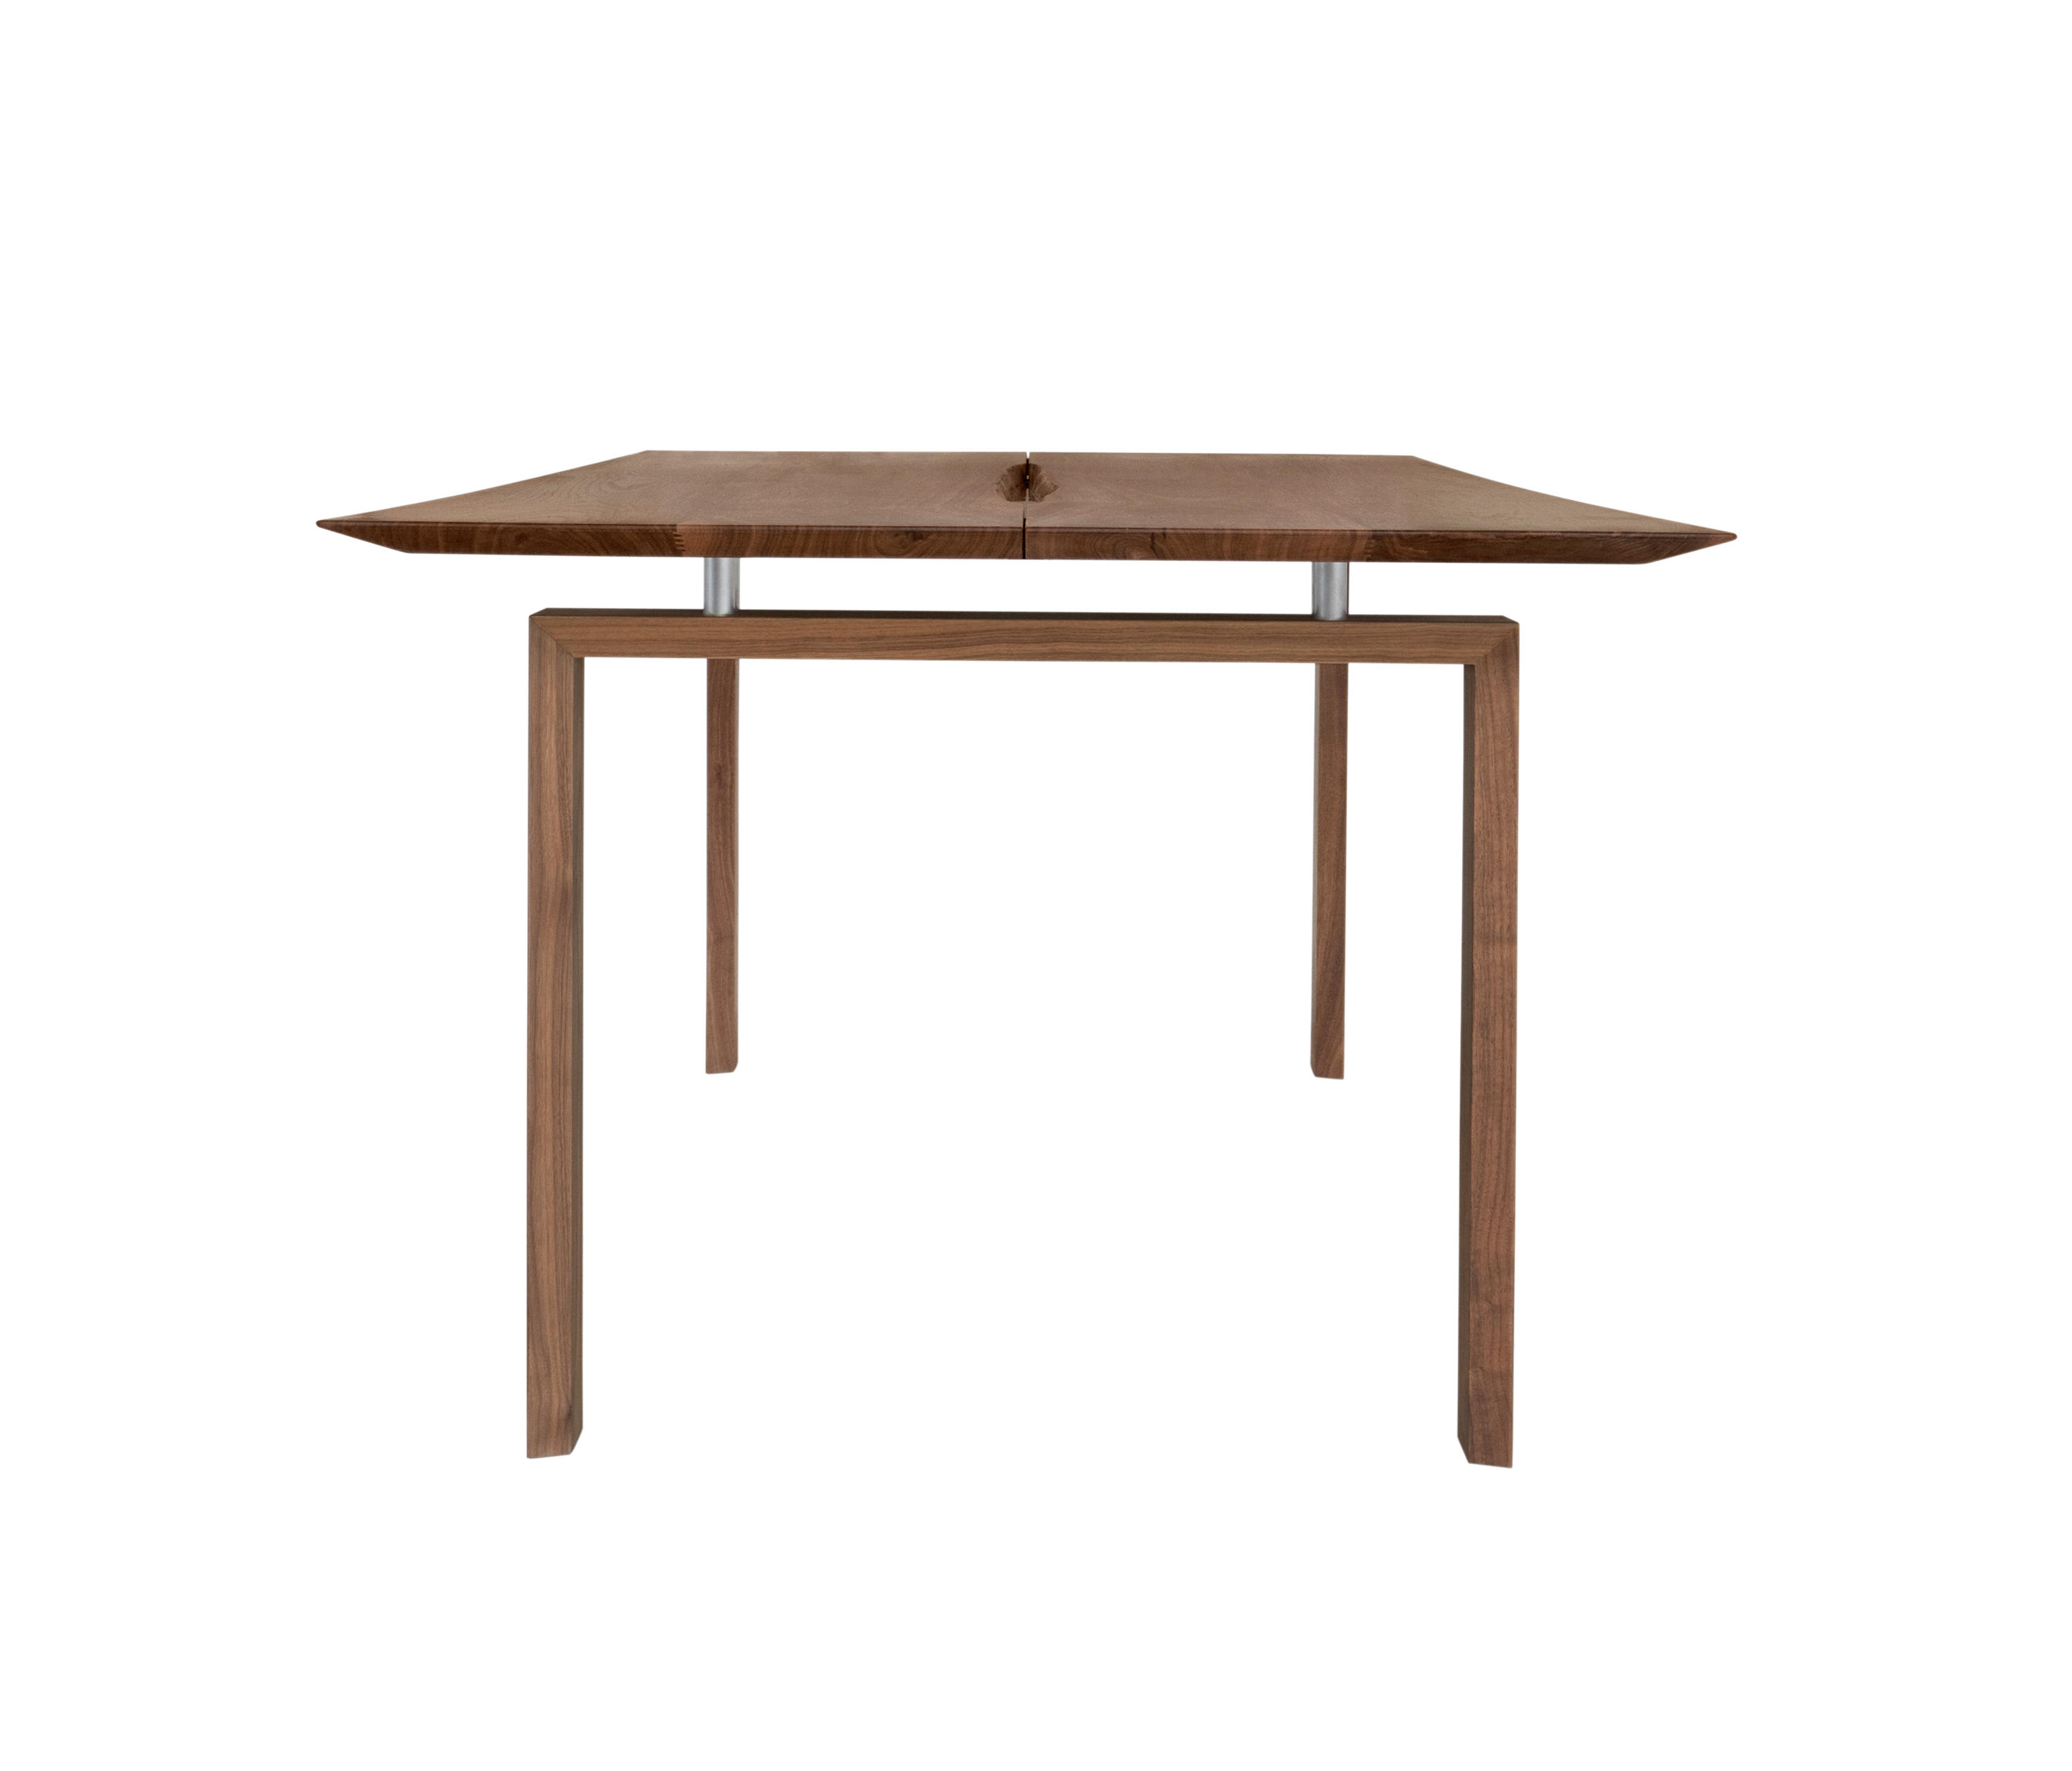 CANYON - Dining tables from Conde House | Architonic